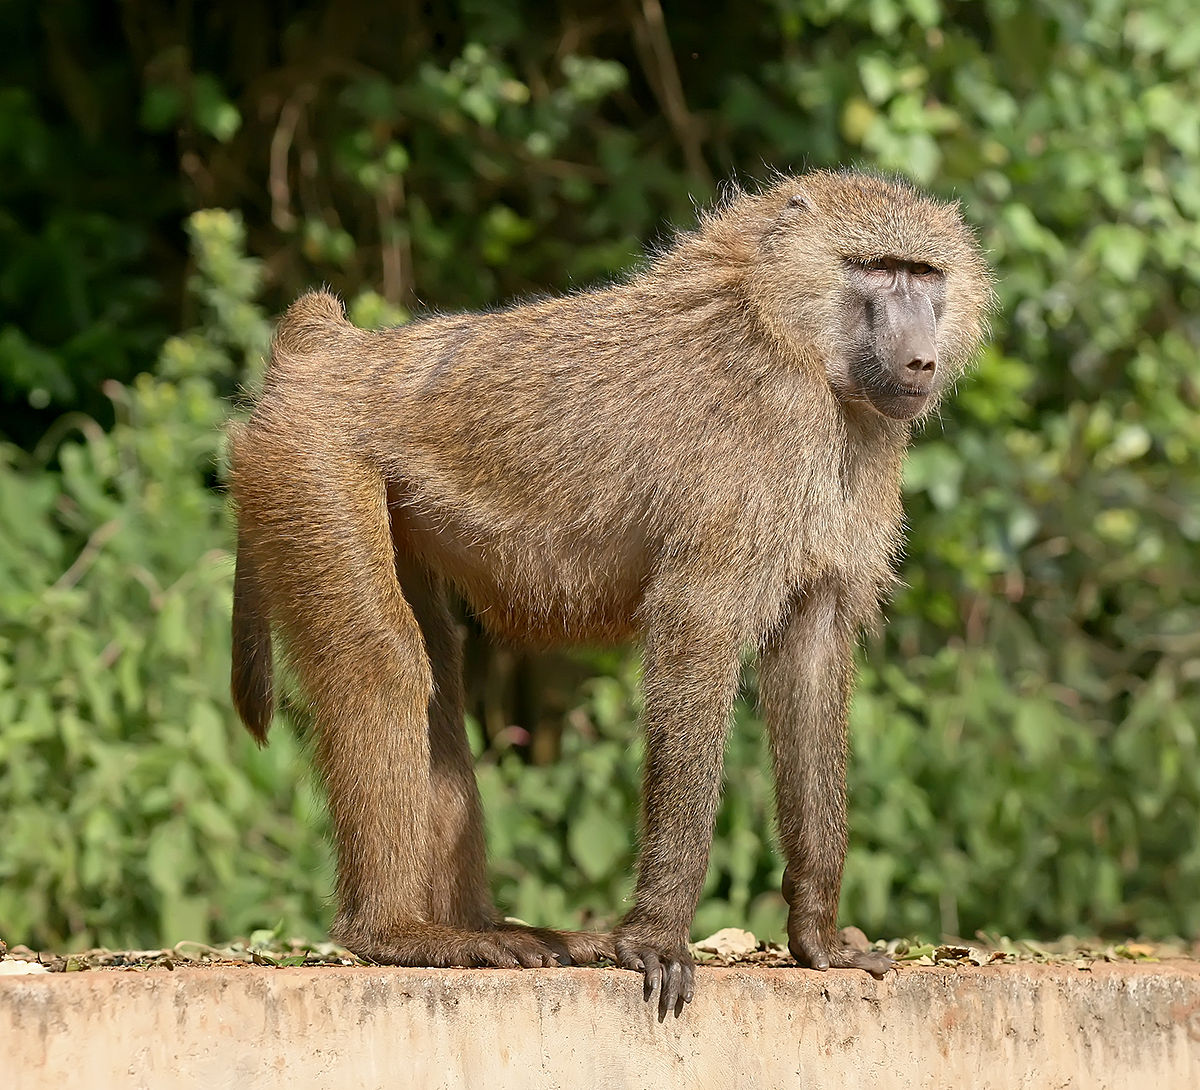 Why are baboons Old World monkeys?